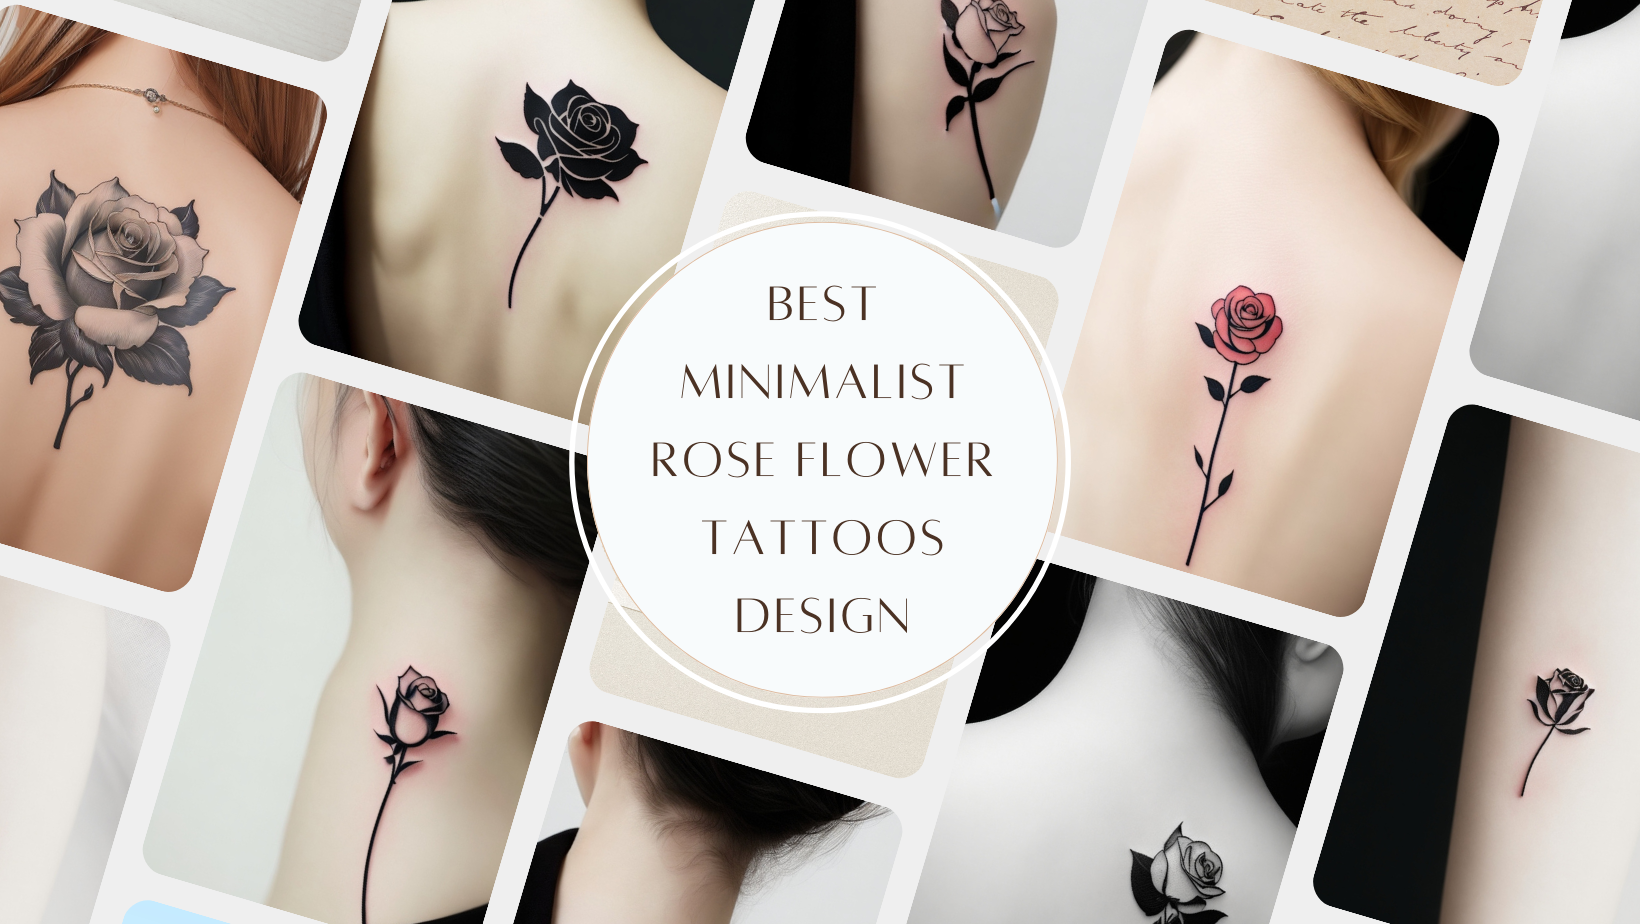 50 Best Minimalist Rose Flower Tattoos Design: A Gallery of Sublime Beauty